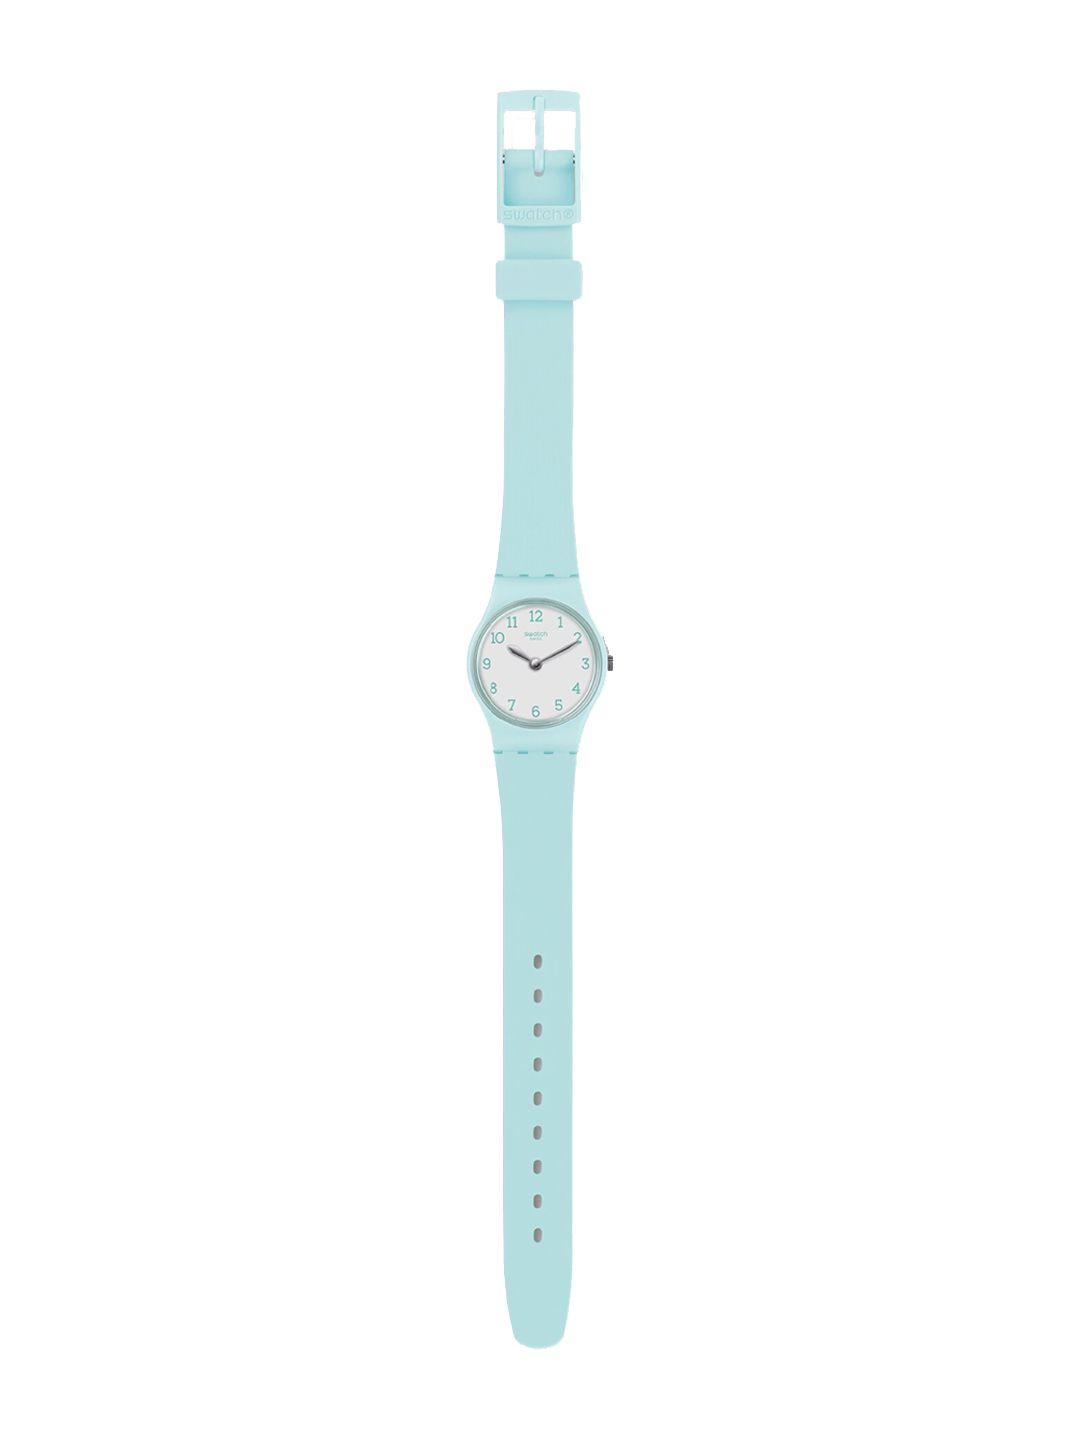 Swatch Women Printed Dial Analogue Watch LG129